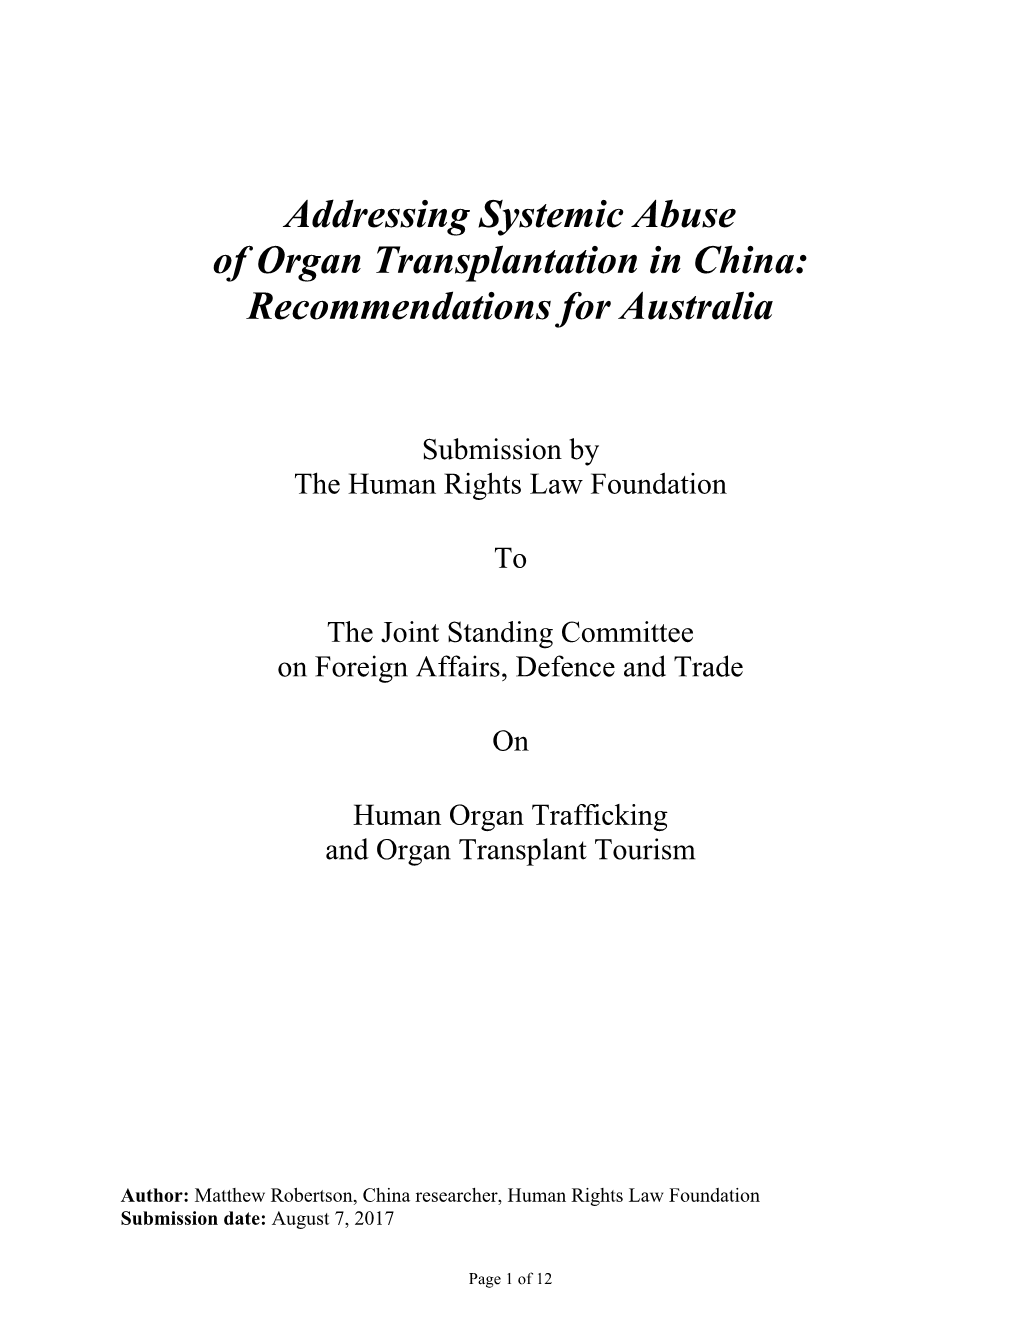 Addressing Systemic Abuse of Organ Transplantation in China: Recommendations for Australia